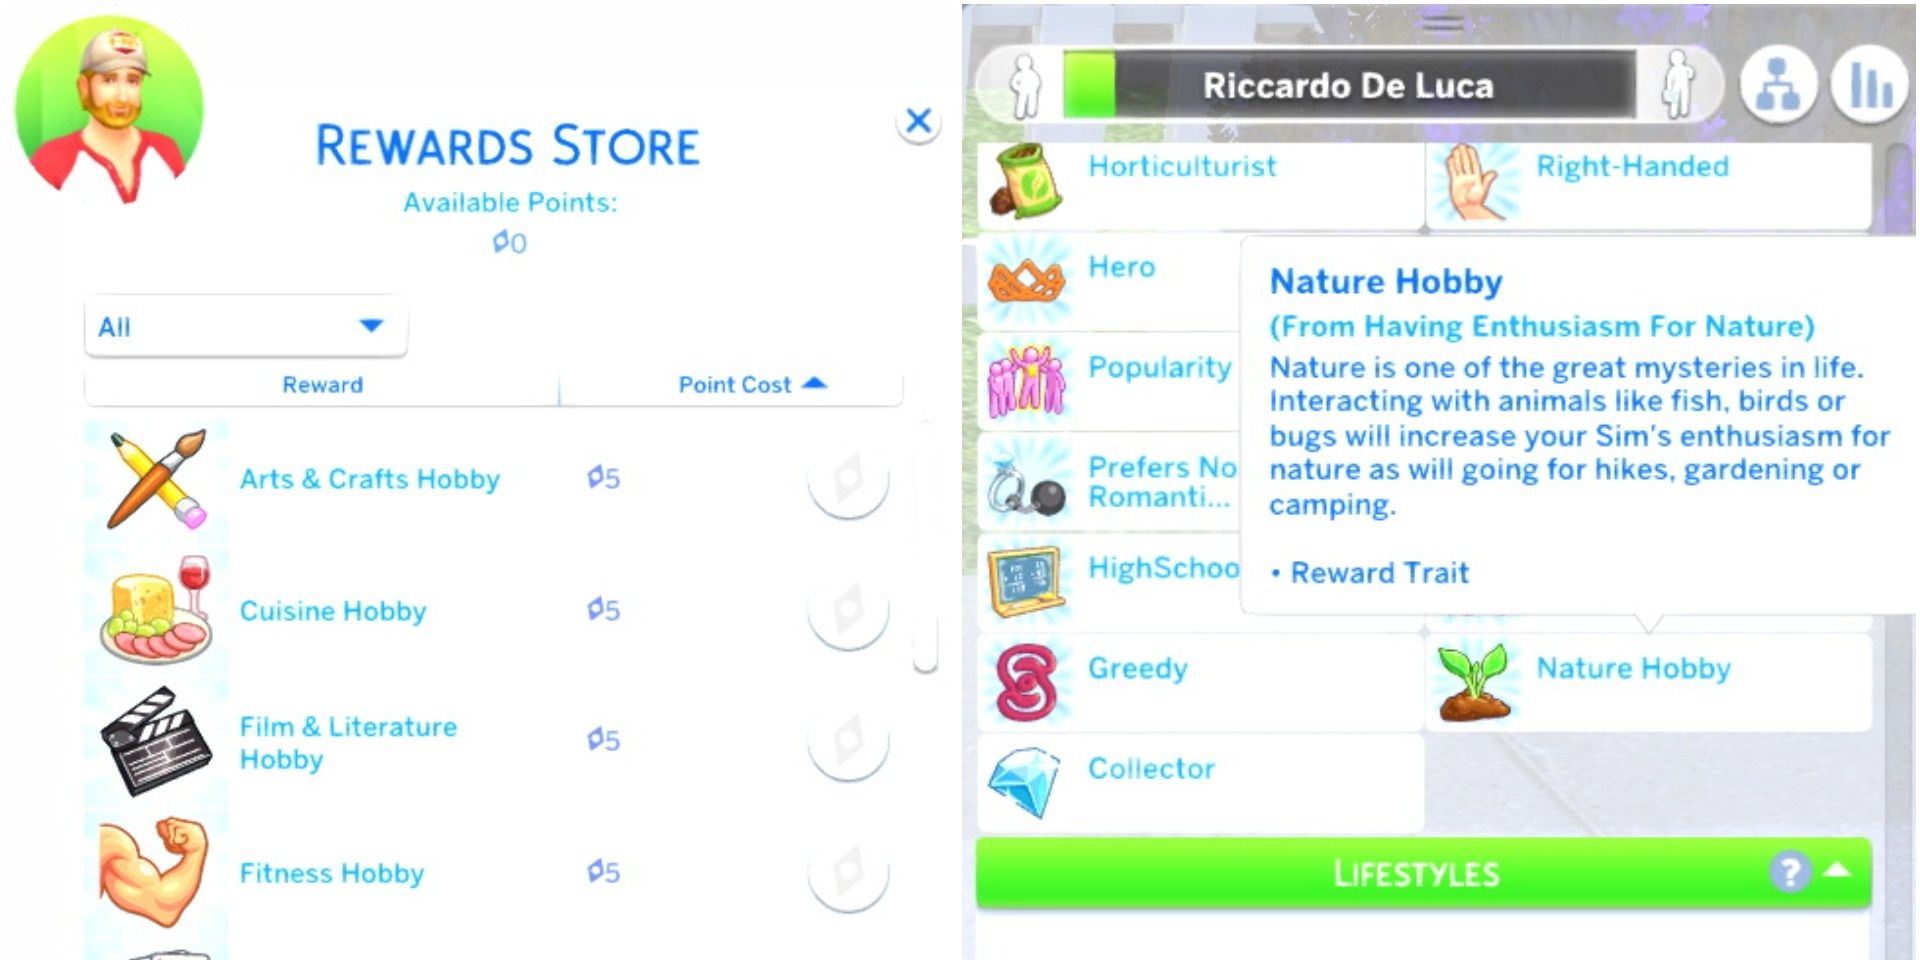 Two images are joined together. On the left, a list of hobbies in The Sims 4 reward store: Arts and Crafts, Cuisine, Film & Literature, and Fitness. On the right, Sim Ricardo de Luza's Simology profile, showing his Nature hobby.